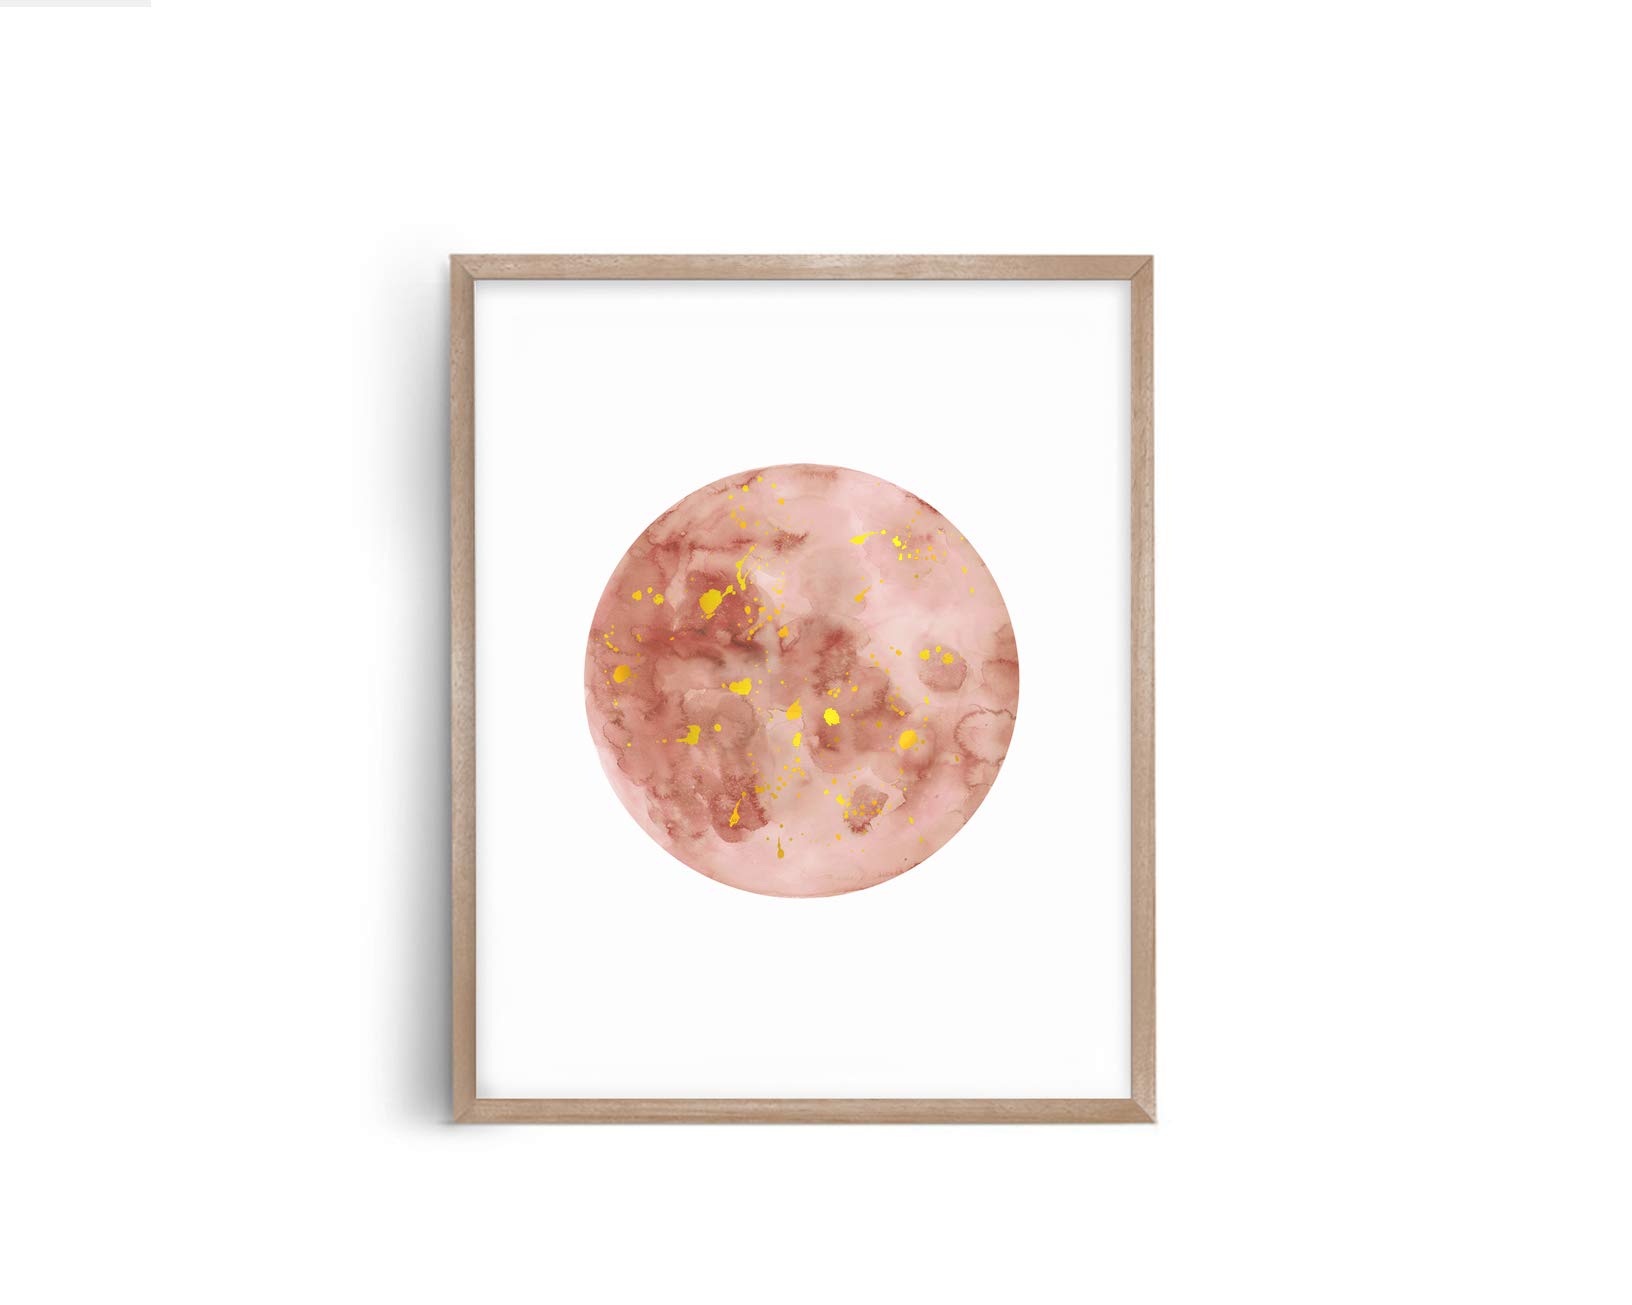 Copper Moon Phases Wall Art Print Bedroom Wall Decor Moon Art Set Of 5 Prints Copper Moon Decor Home Decor Unframed Prints (8x10 with gold drops)